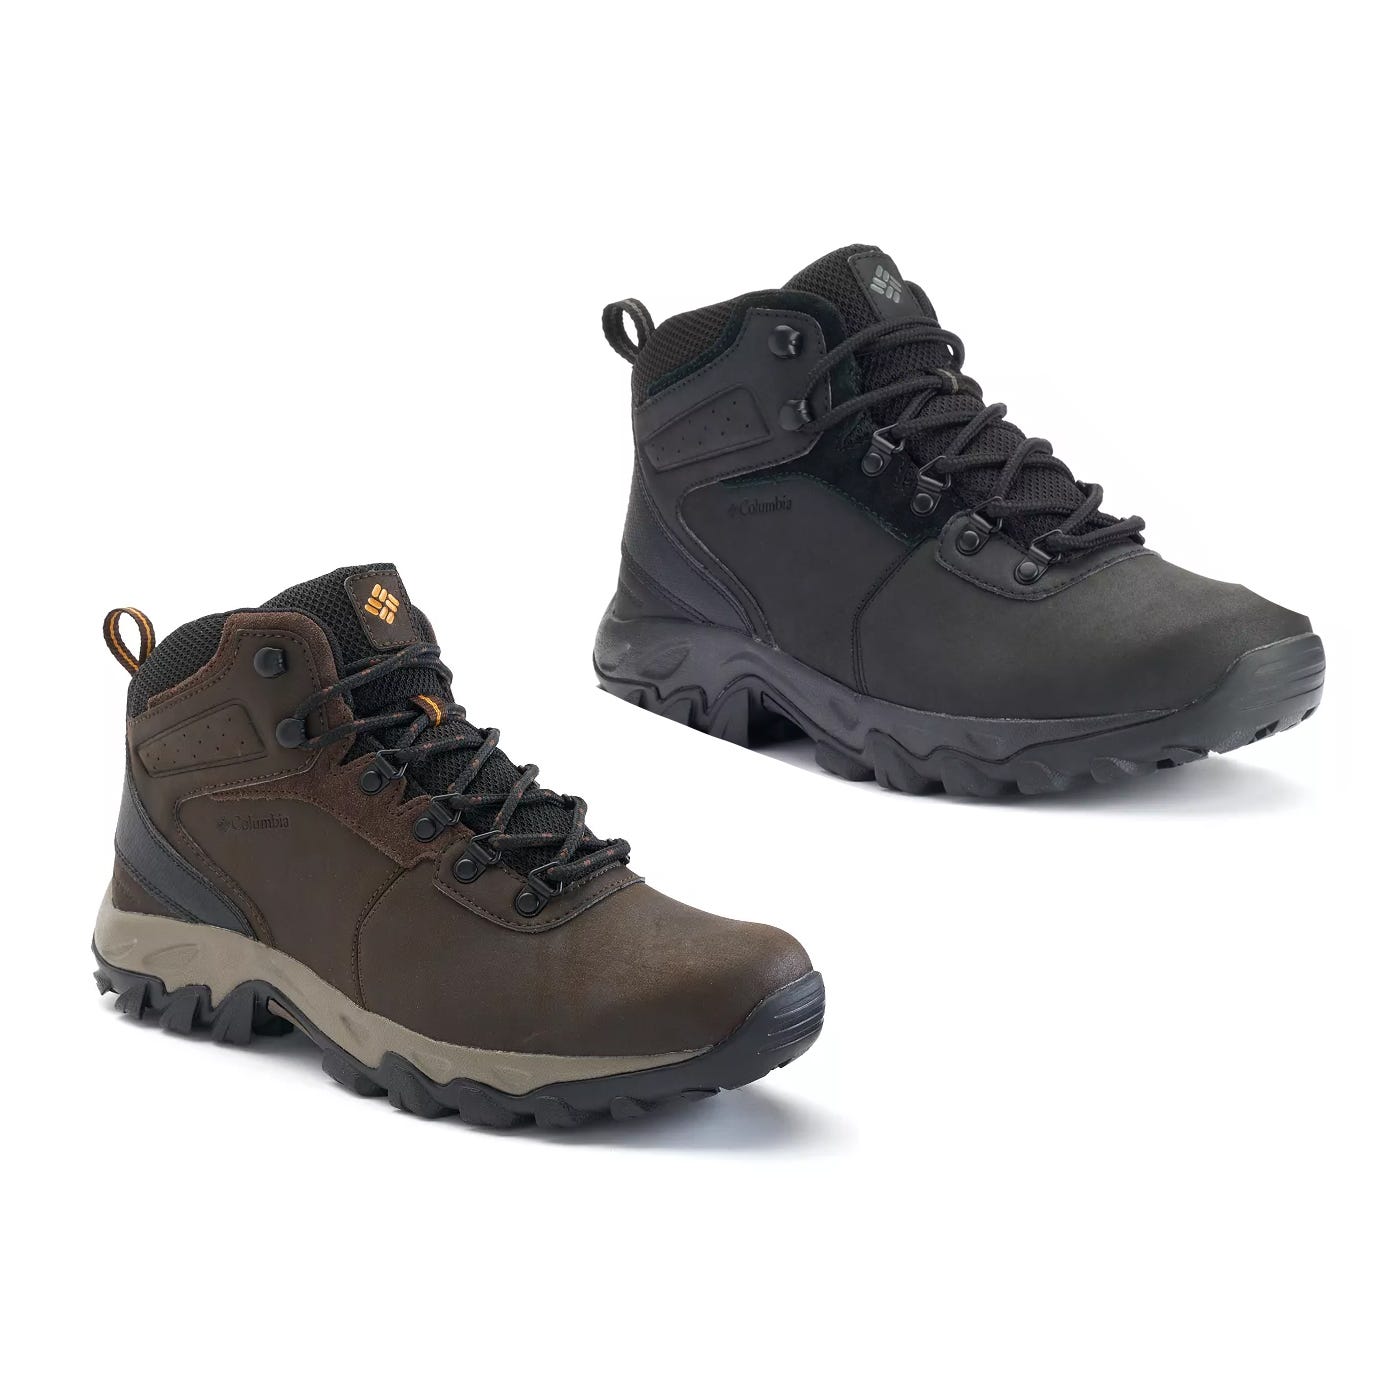 Two pairs of Columbia hiking boots, one in black and the other in brown.